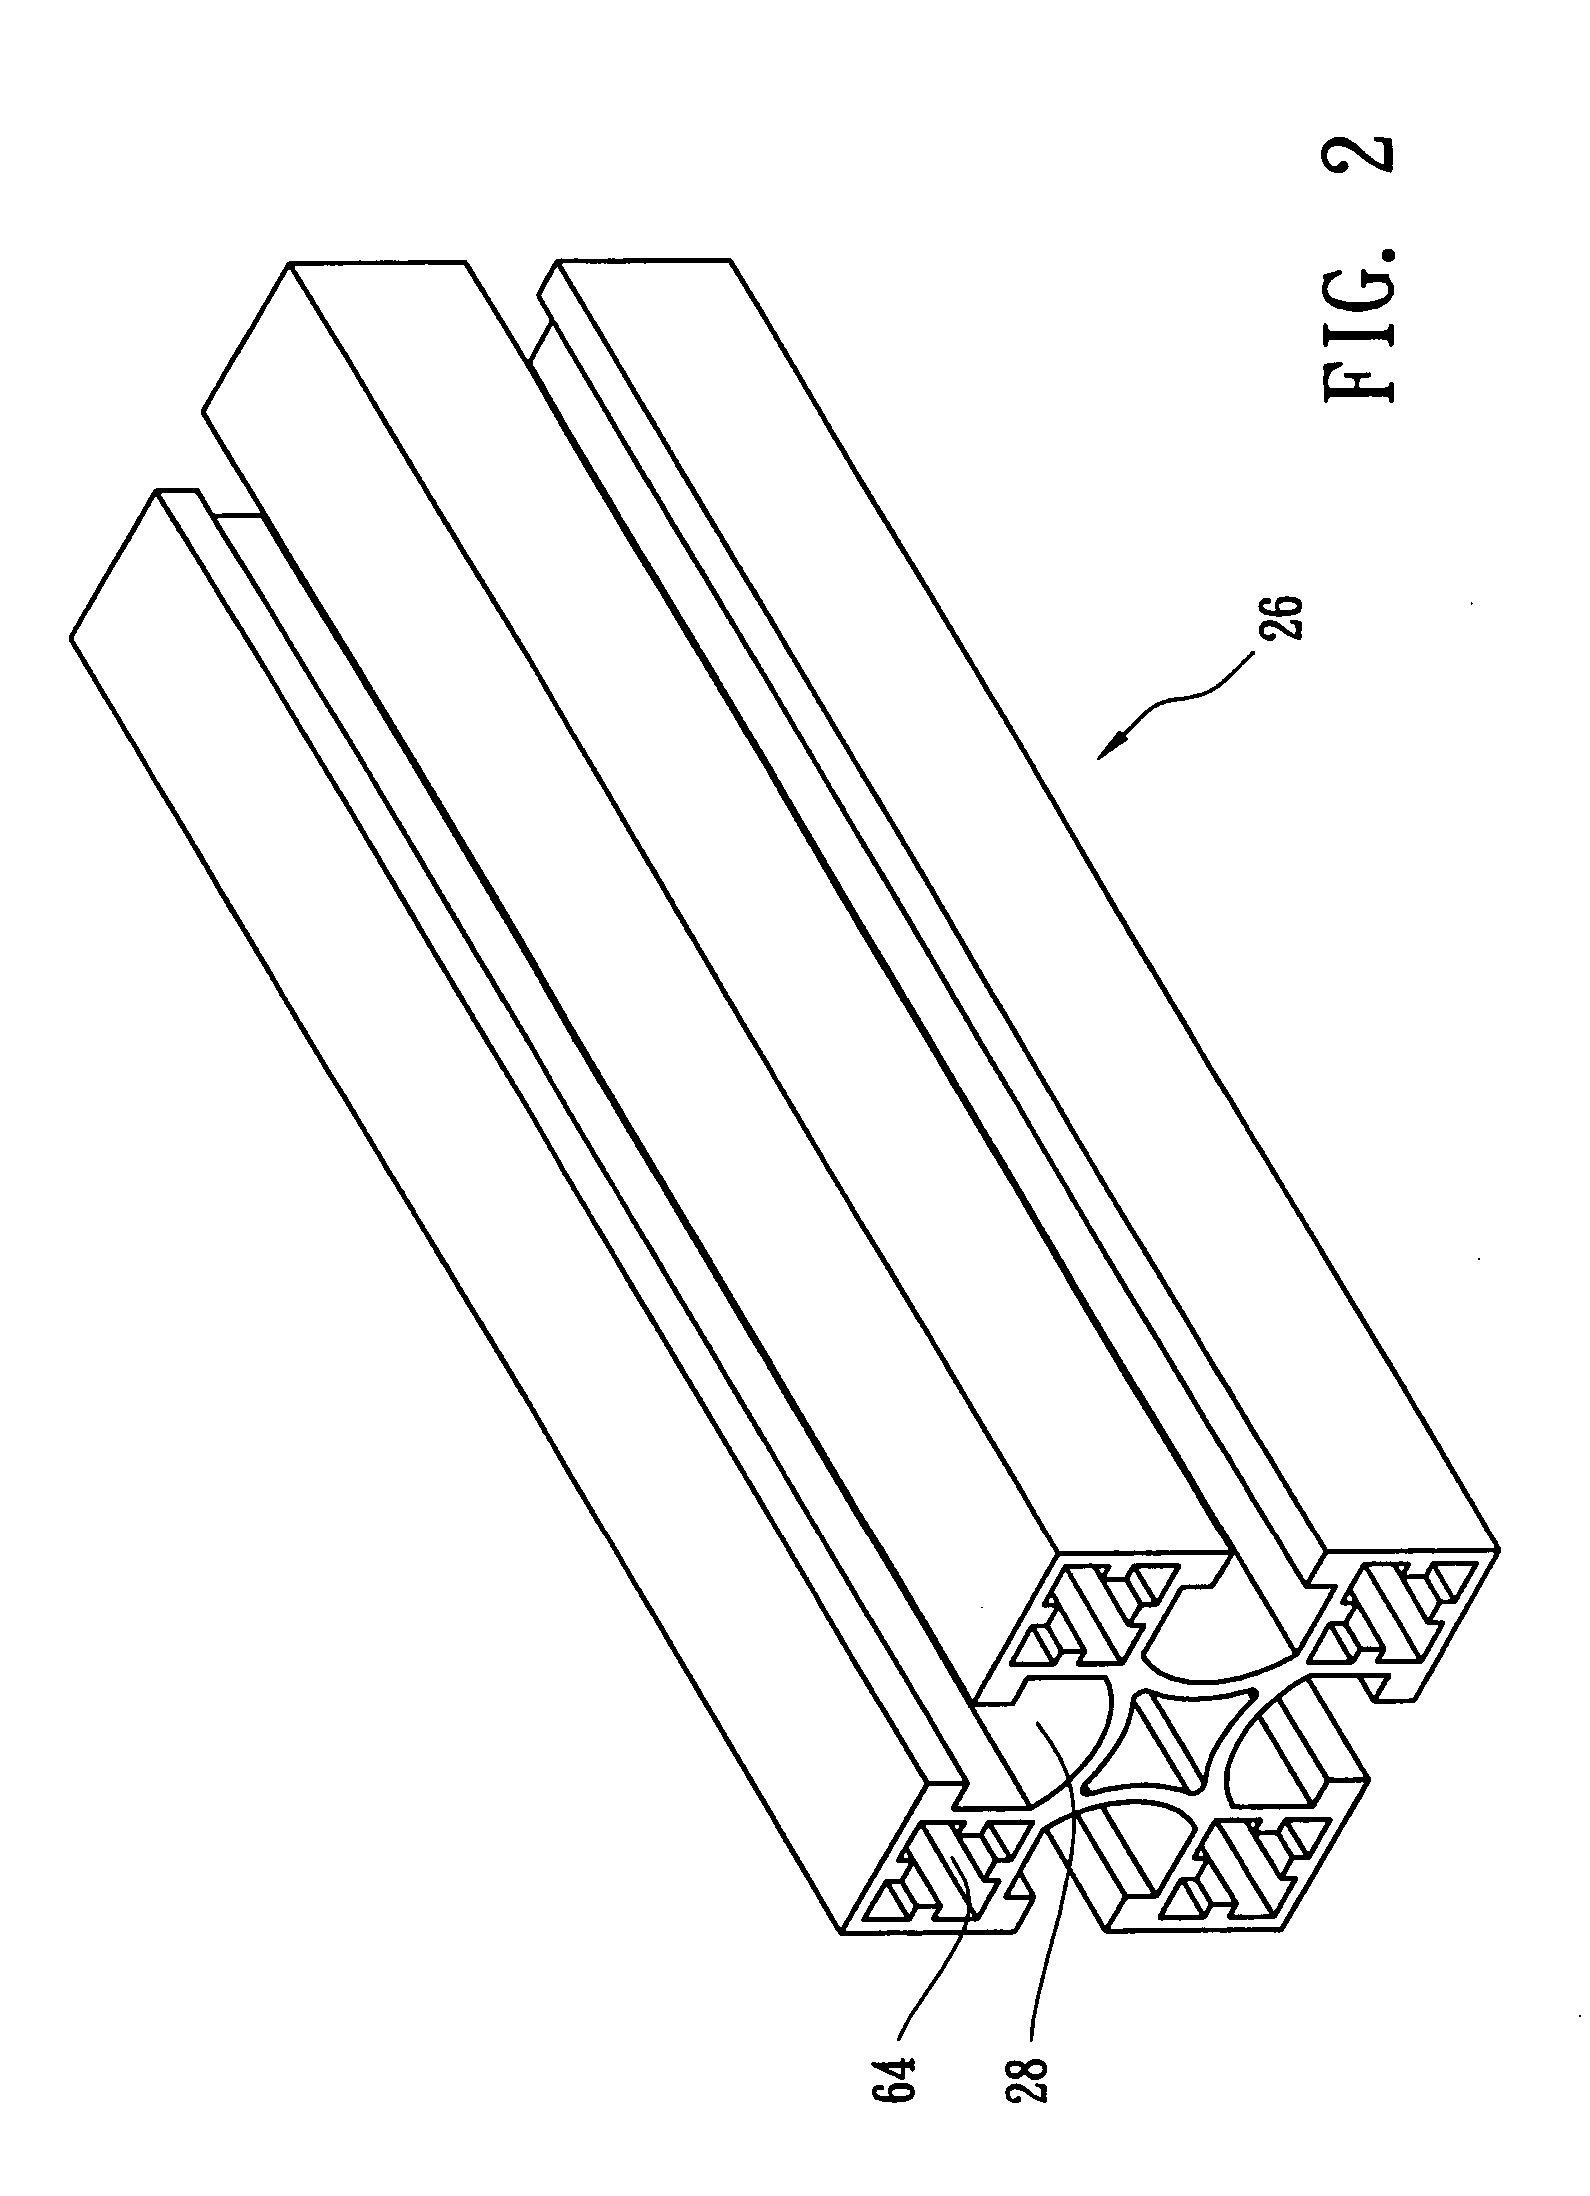 Photovoltaic concentrating apparatus